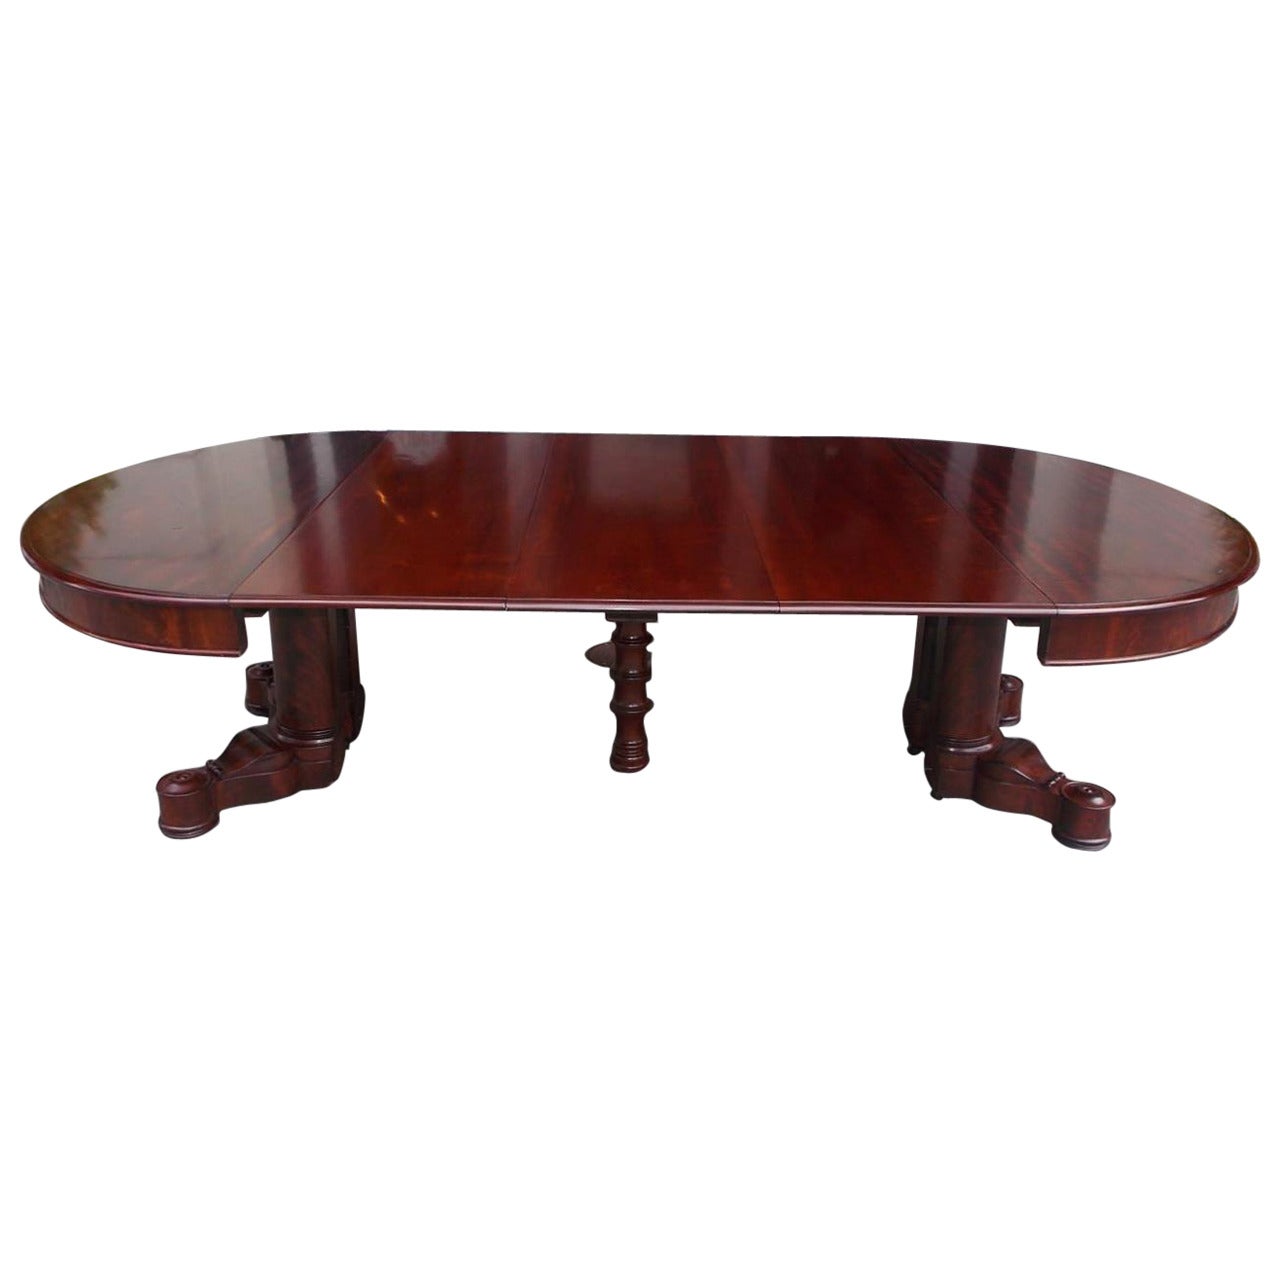 American Classical Mahogany Dining Table with Console Table, Boston Circa 1830